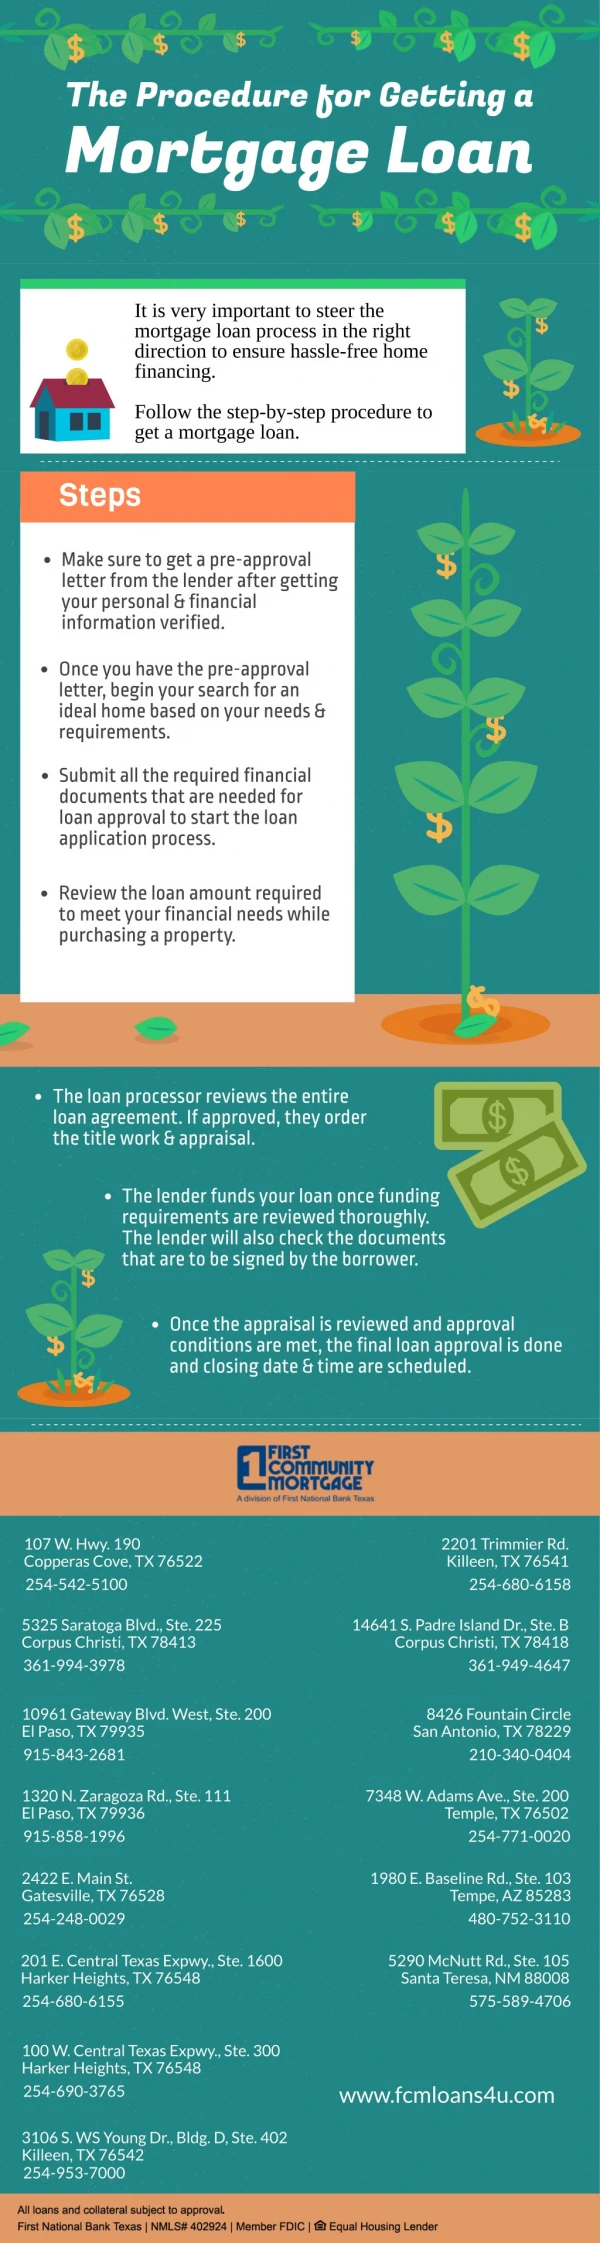 The Procedure For Getting A Mortgage Loan